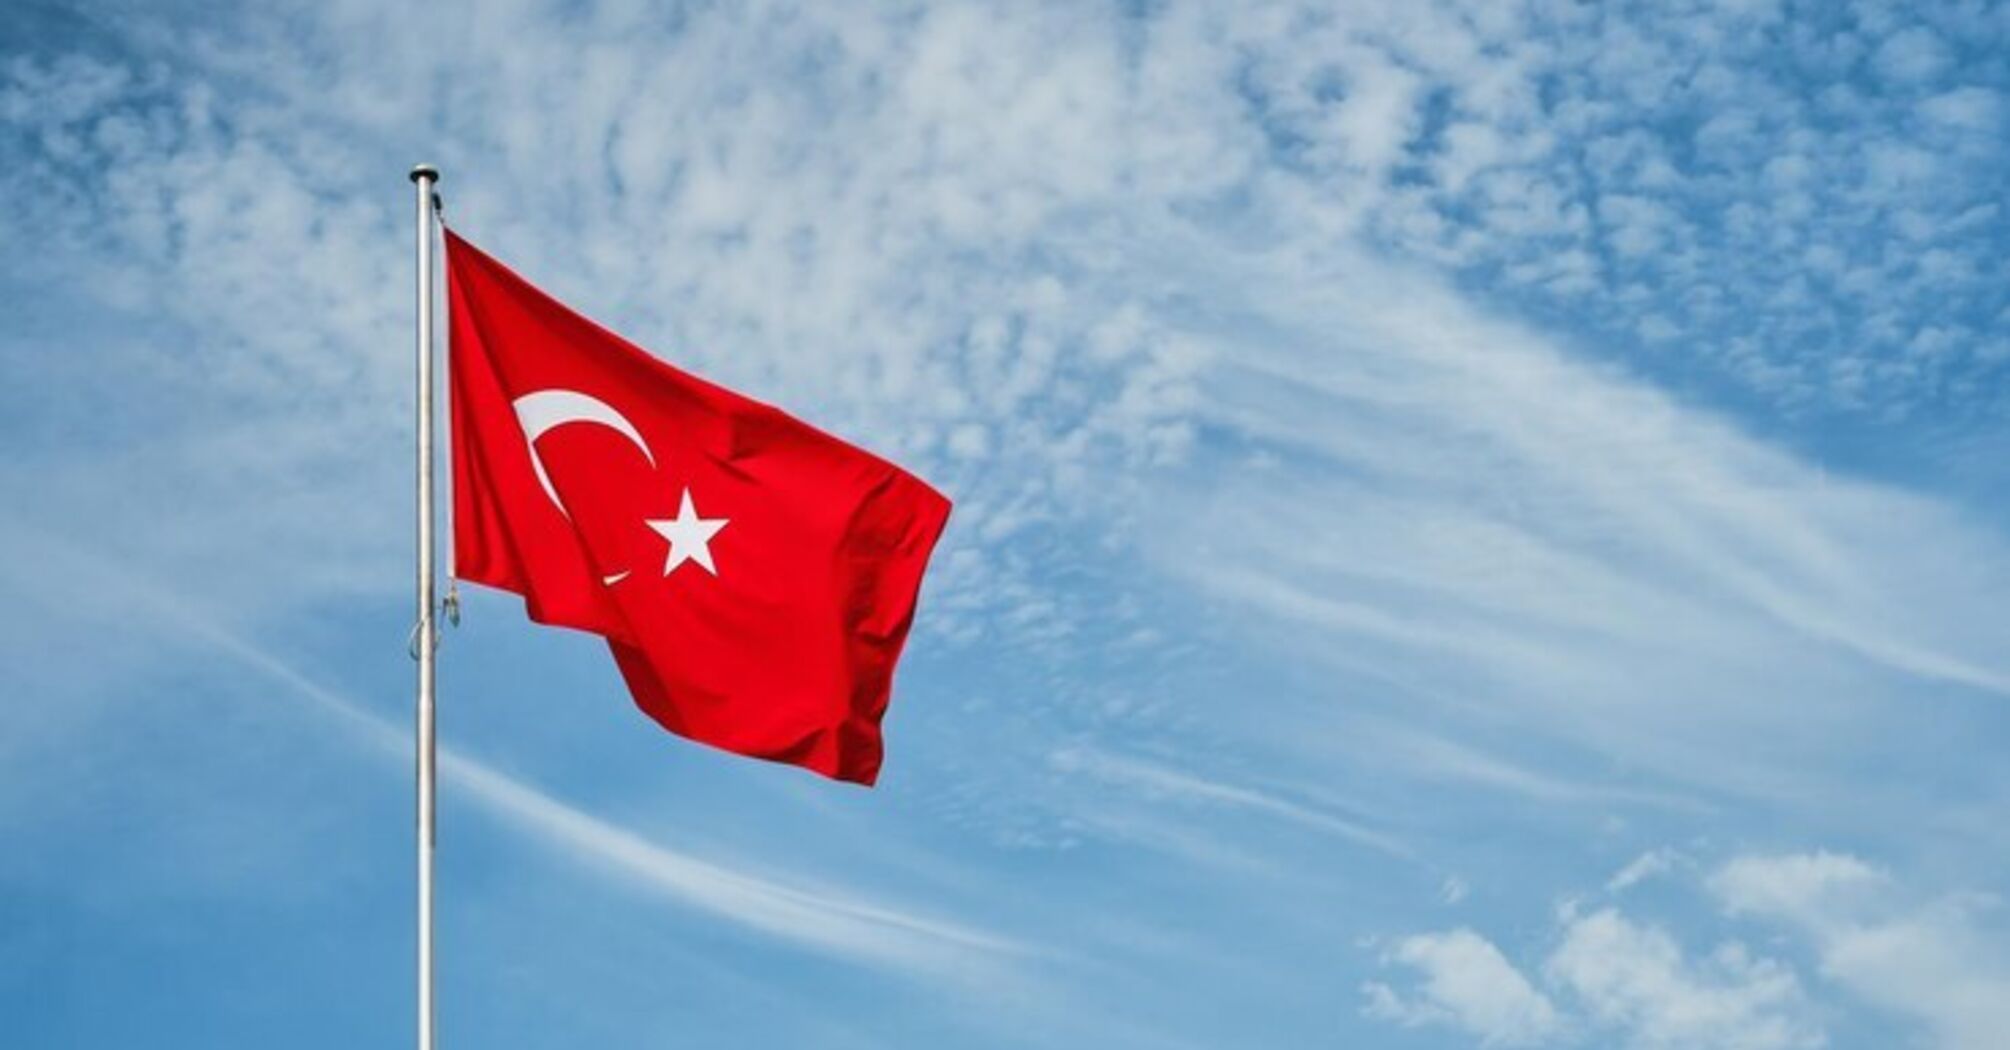 Turkey has extended the period of visa-free stay for citizens of Kyrgyzstan